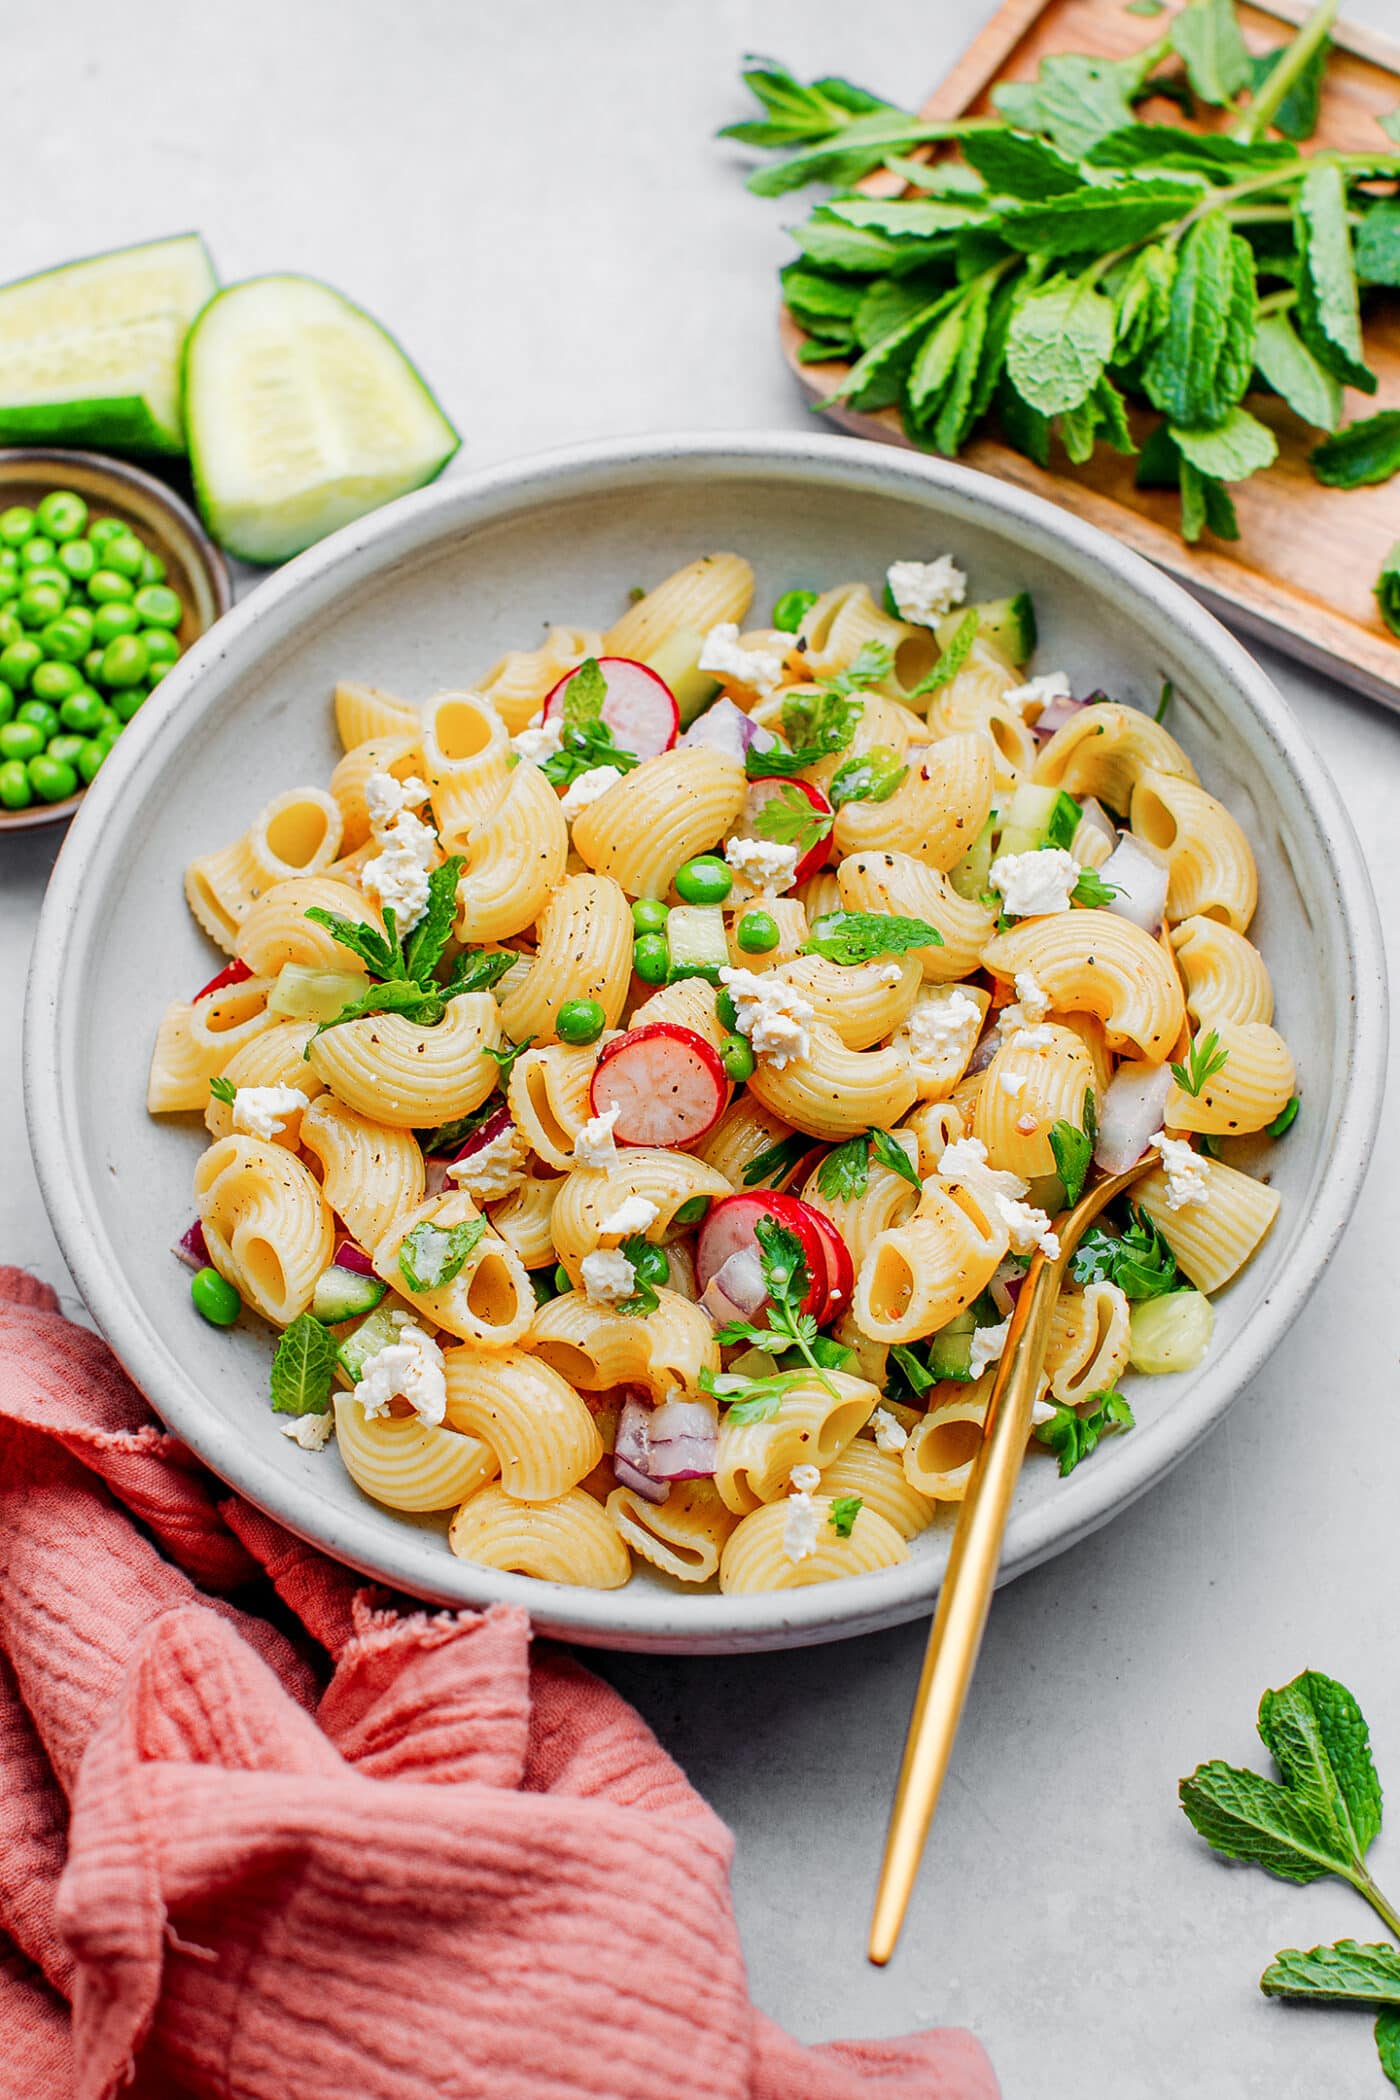 Macaroni salad with green peas, radishes, mint, and cucumber in a bowl.